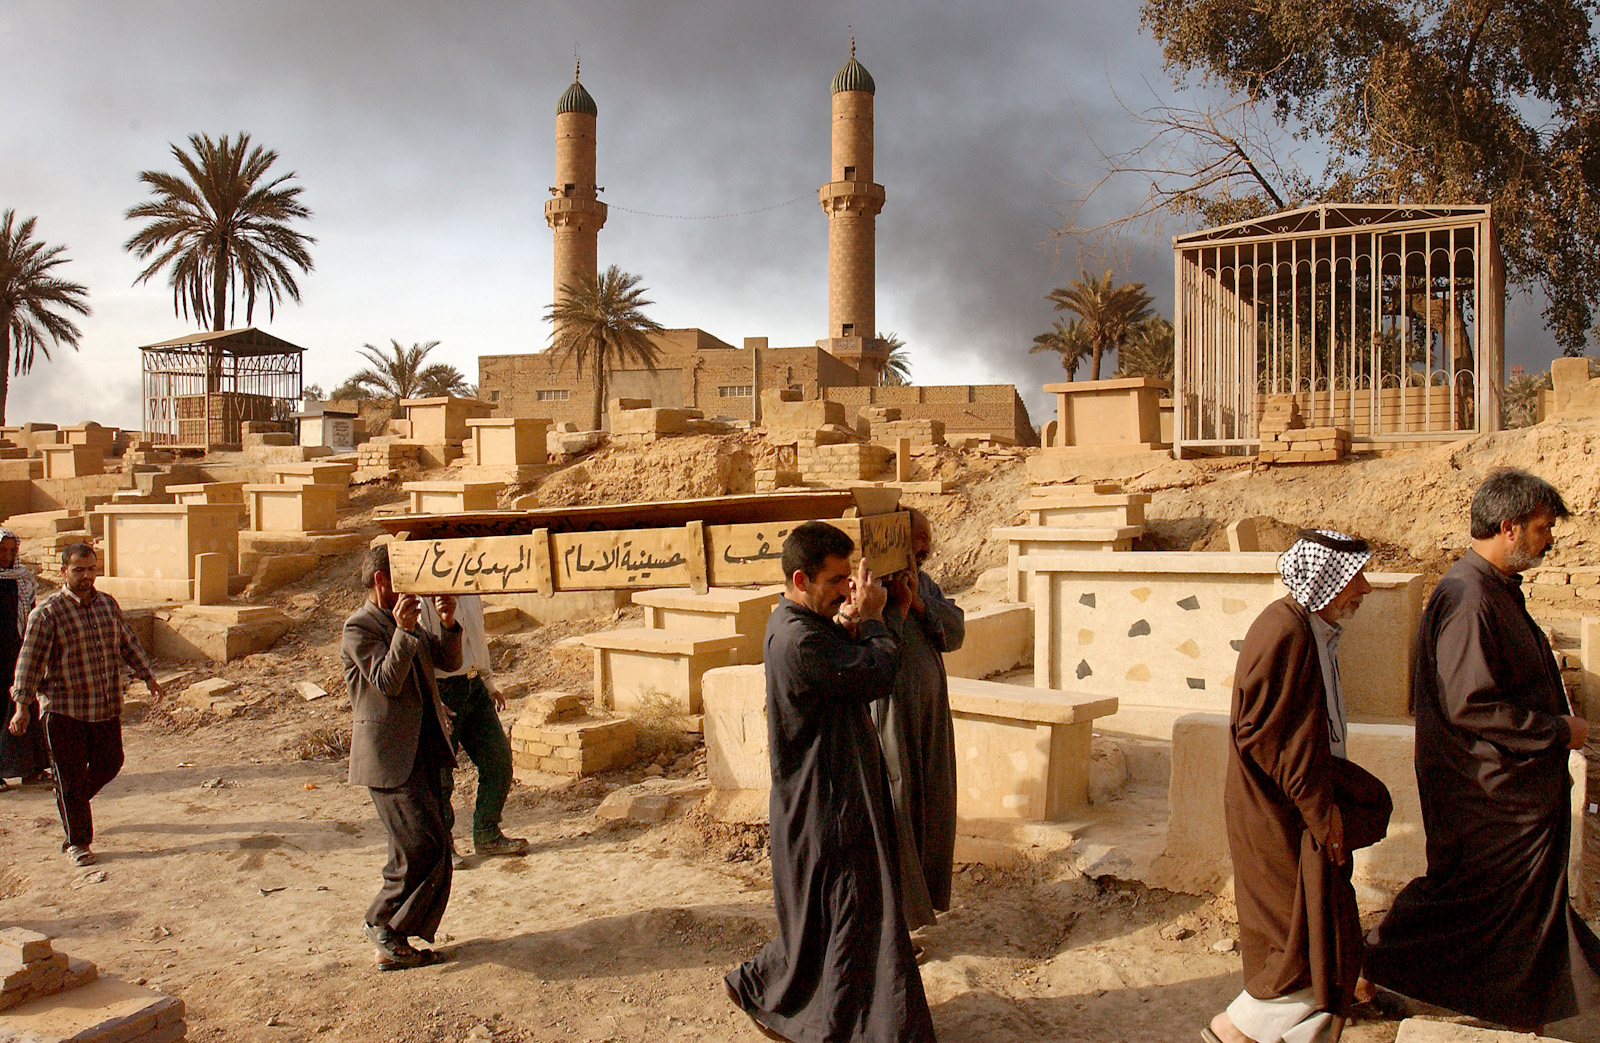 Mourners at a cemetery, Baghdad, Iraq, April 2, 2003.